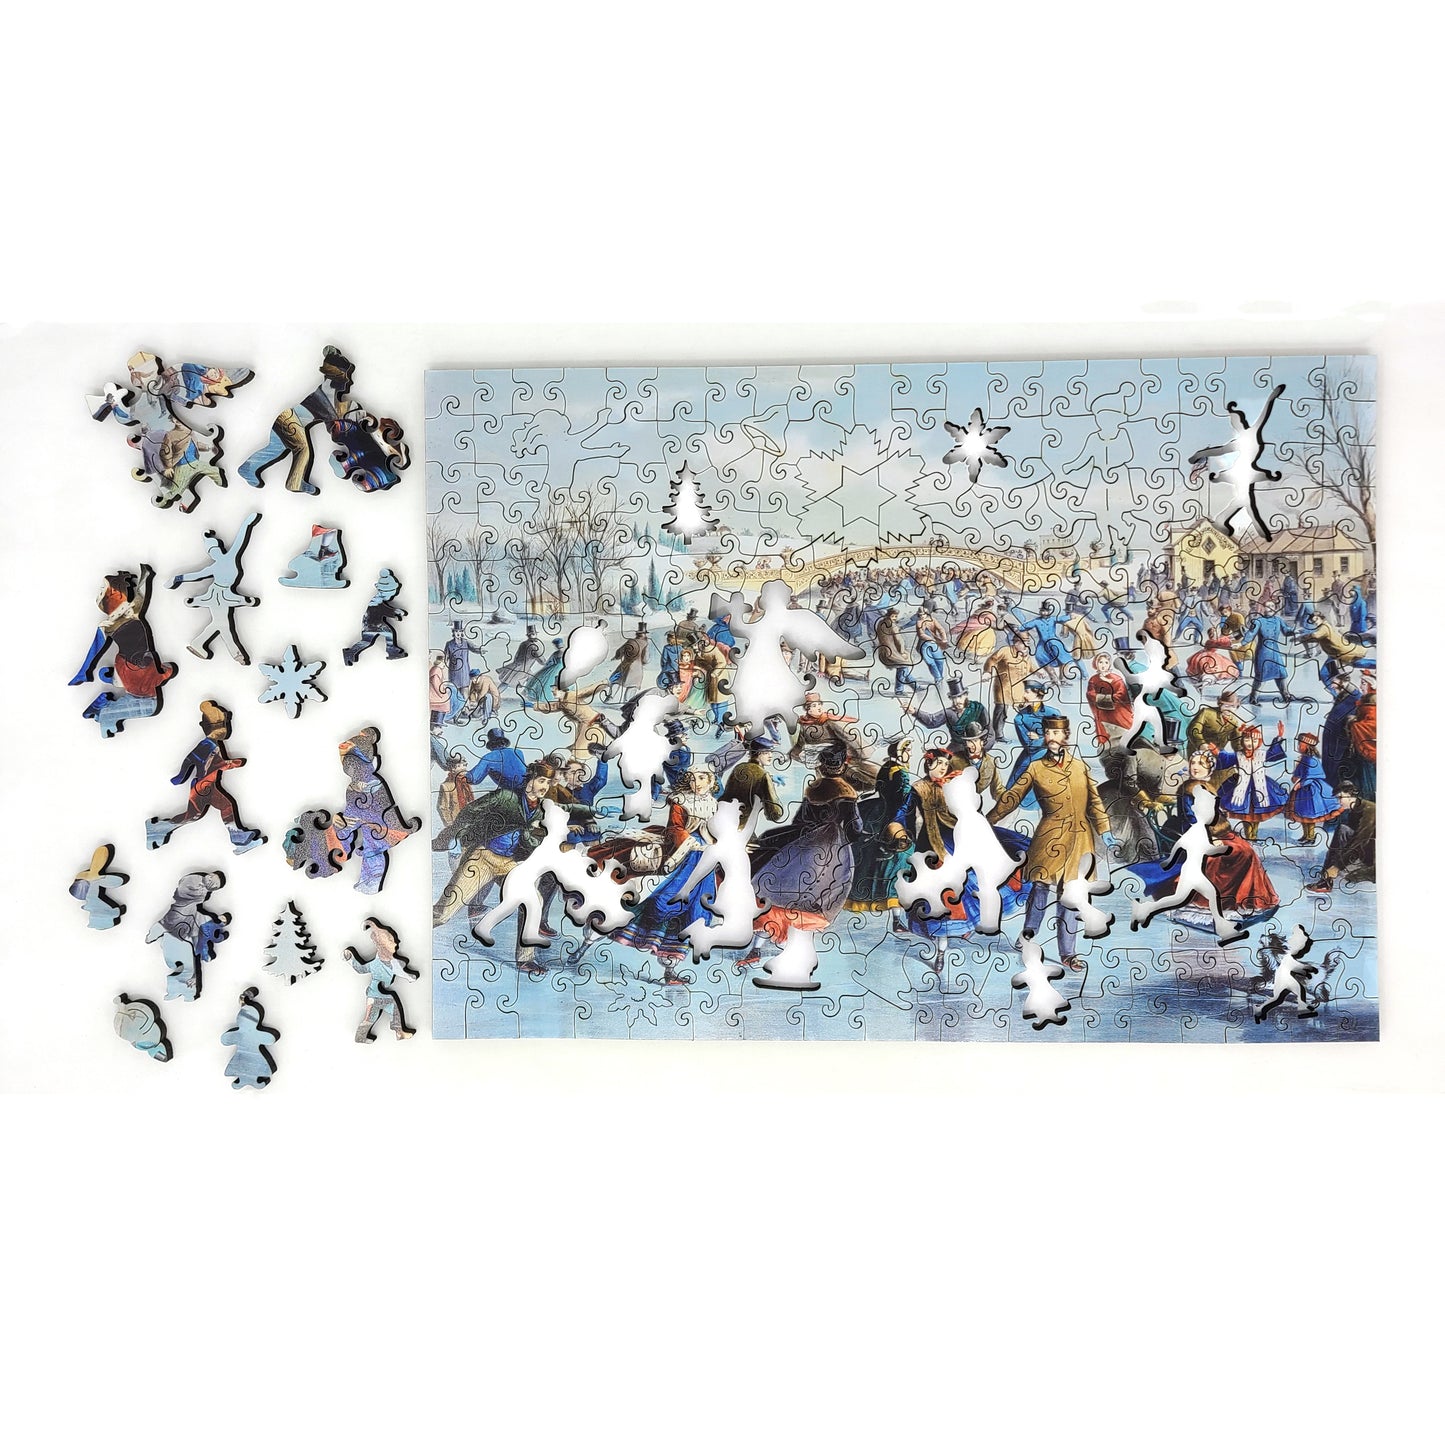 Large Format Wooden Jigsaw Puzzle with Uniquely Shaped Pieces for Seniors and Adults - 262 Pieces - Central Park, Winter – The Skating Pond